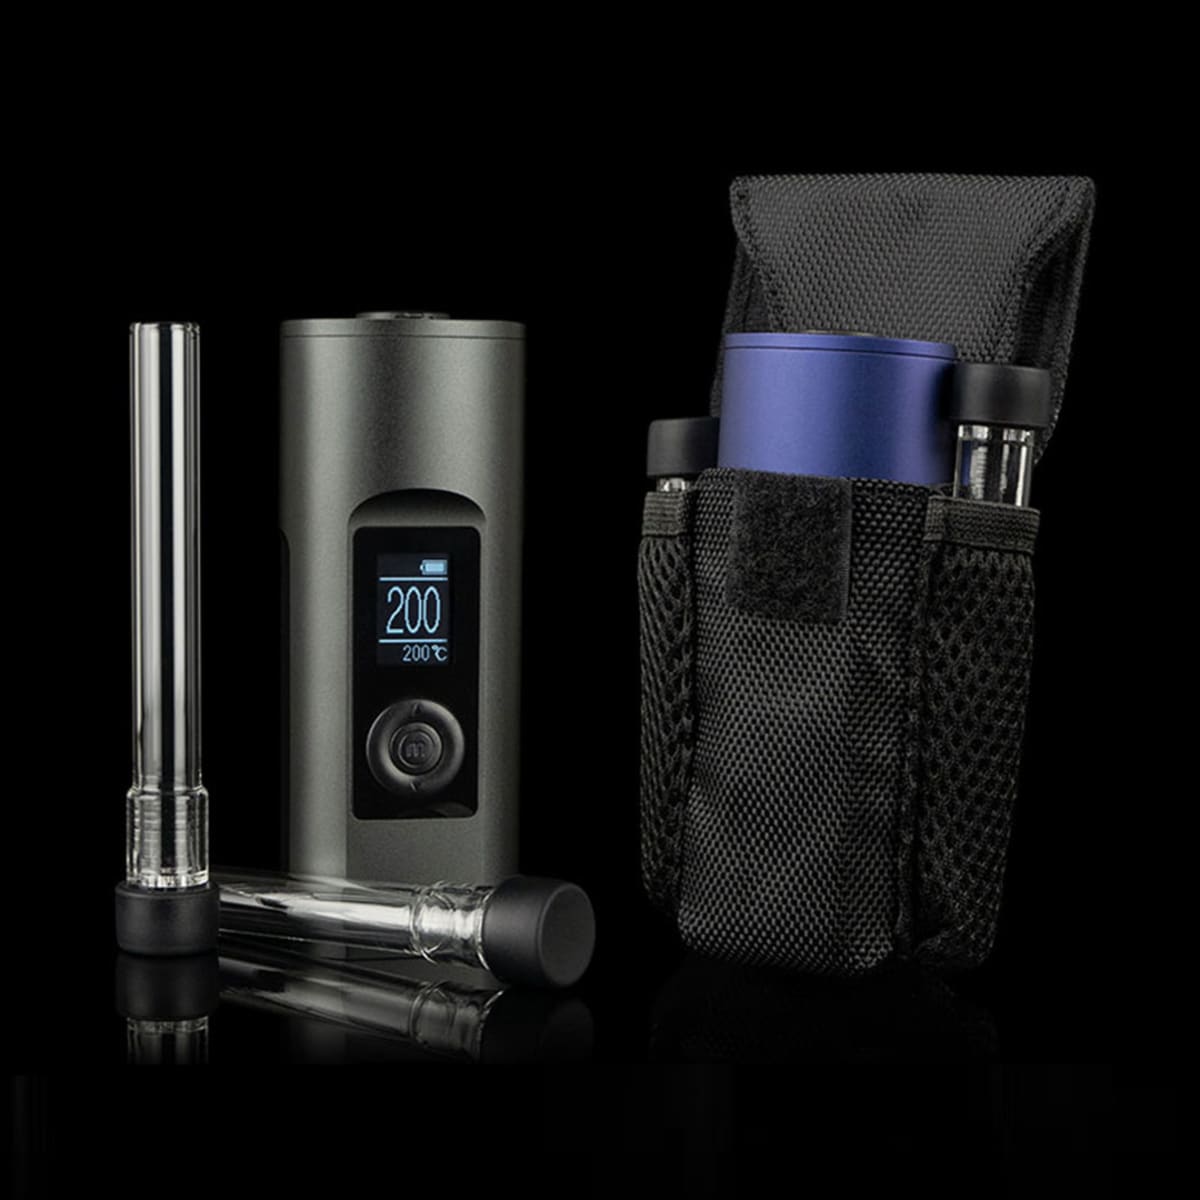 Arizer SOLO 2 and Storz & Bickel Mighty: Still the Two Most